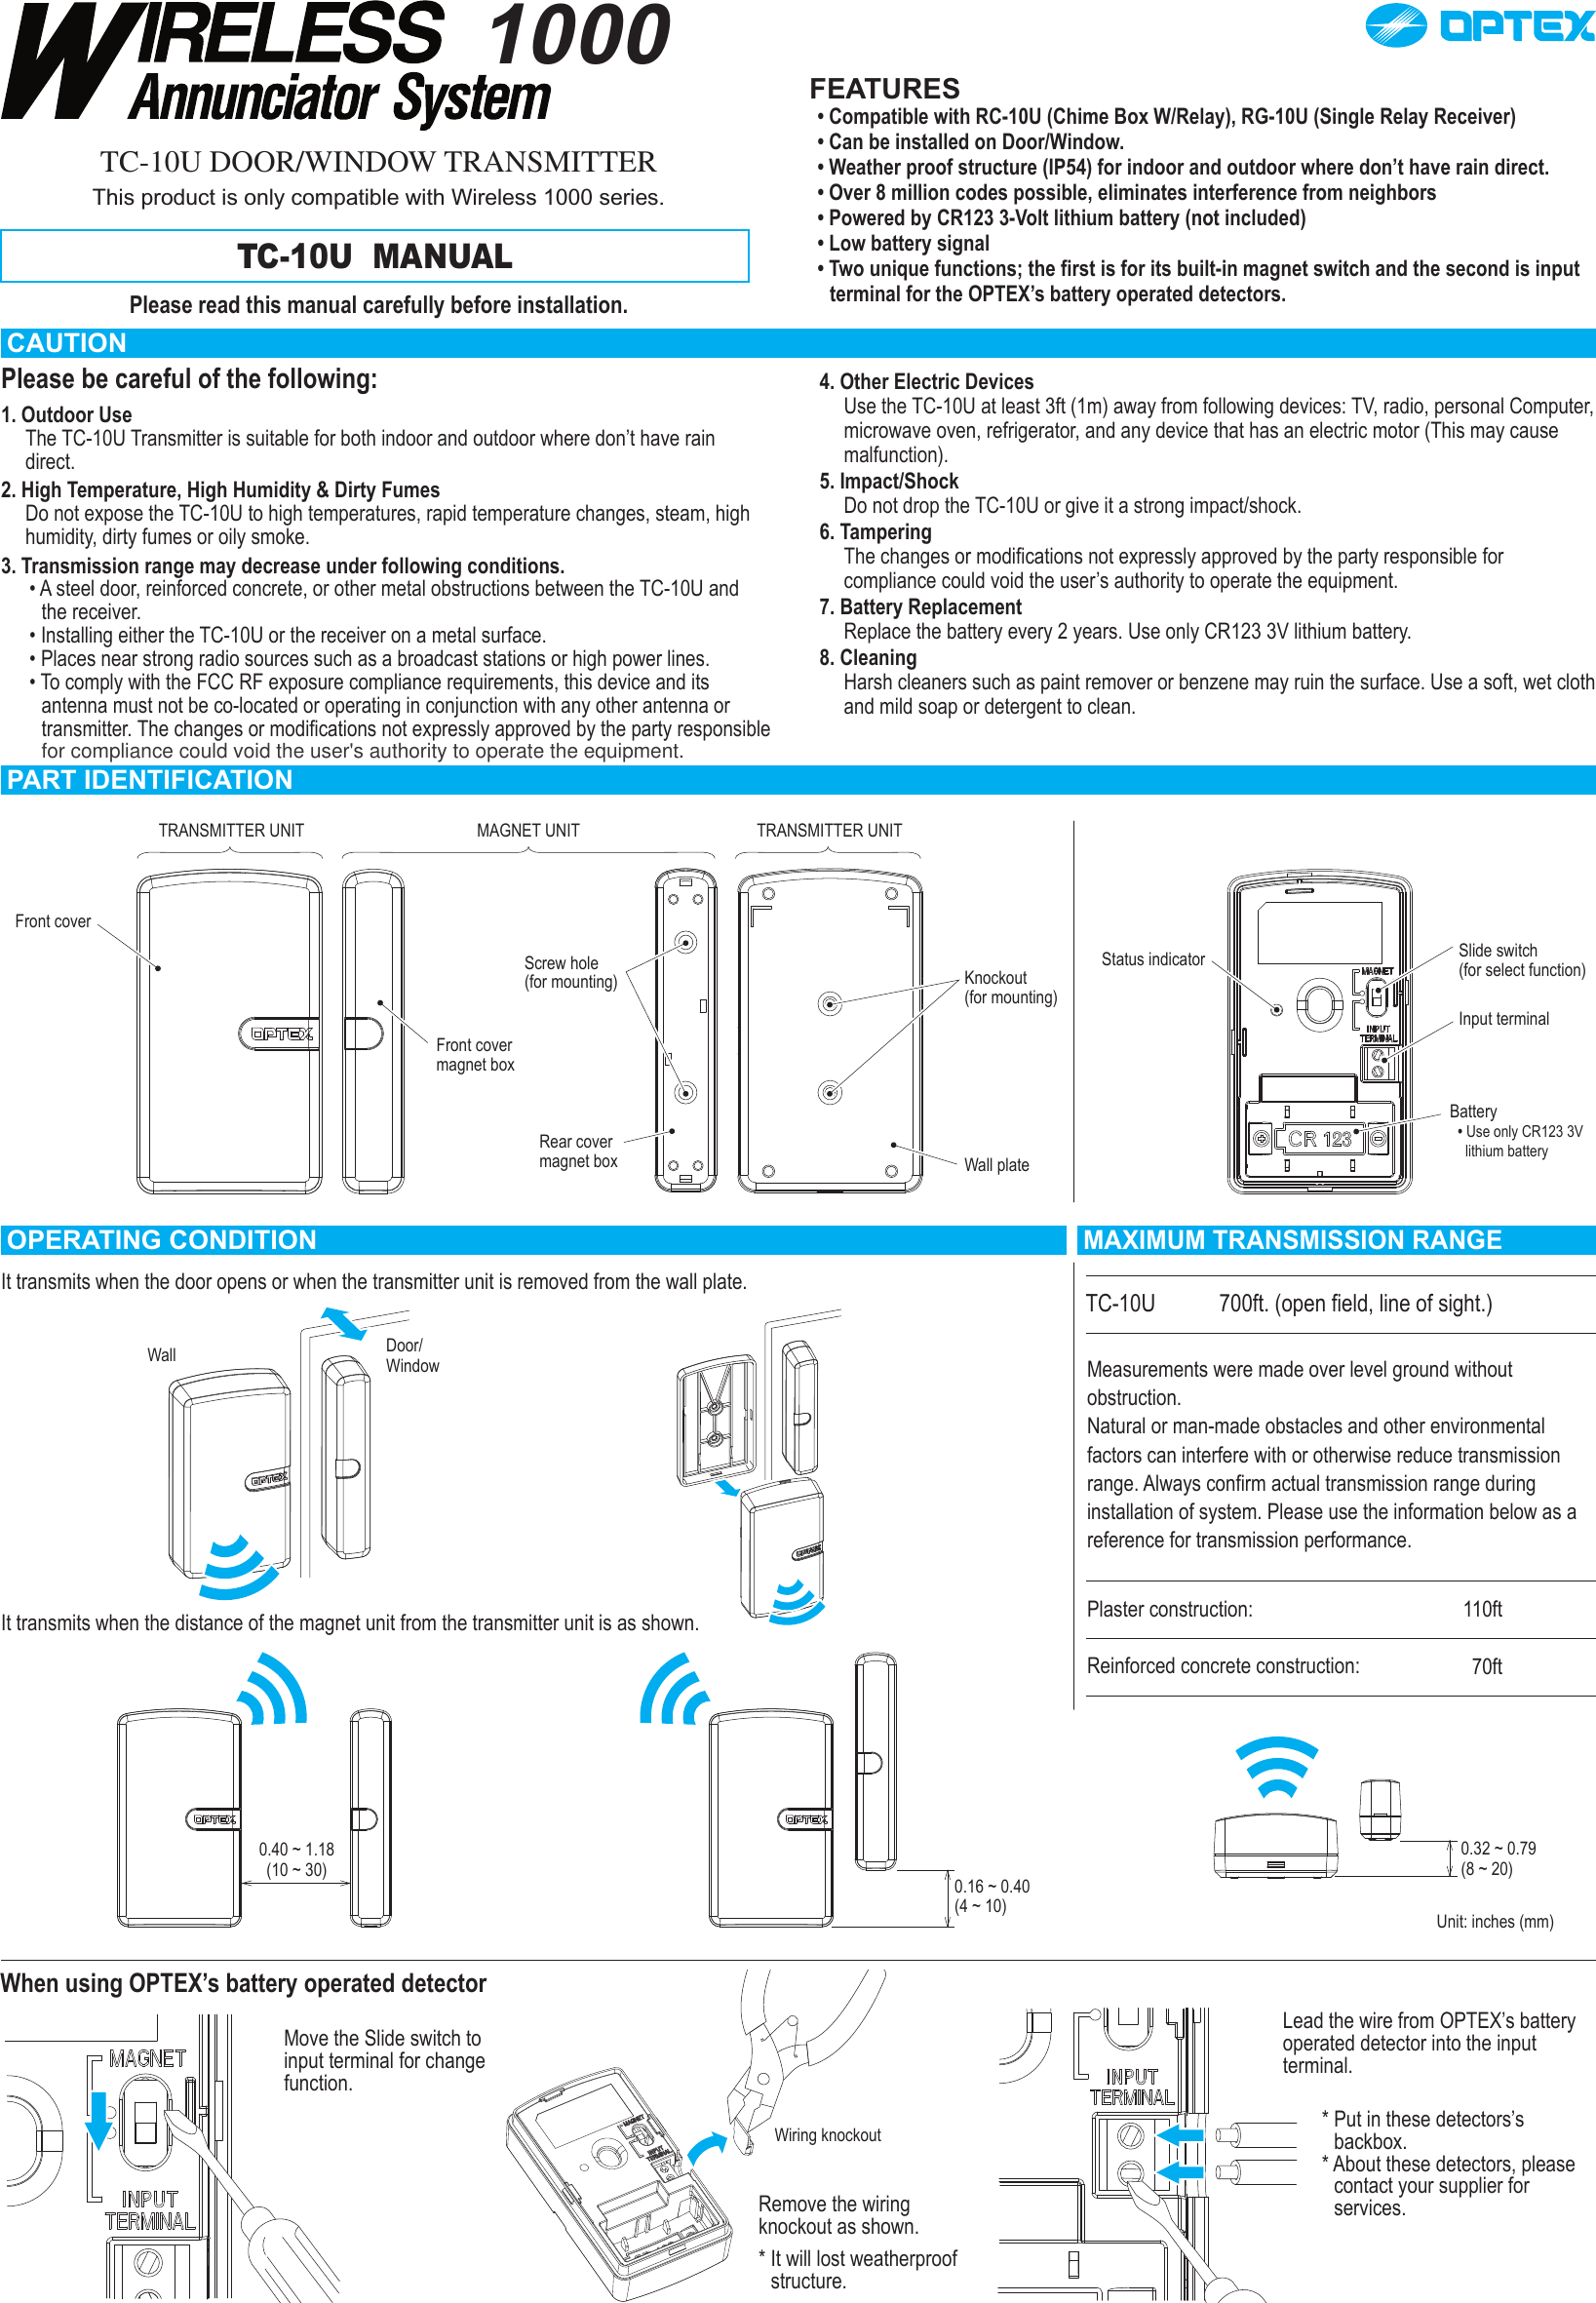 1000TC-10U DOOR/WINDOW TRANSMITTERThis product is only compatible with Wireless 1000 series.TC-10U  MANUALPlease read this manual carefully before installation.FEATURES• Compatible with RC-10U (Chime Box W/Relay), RG-10U (Single Relay Receiver)• Can be installed on Door/Window.• Weather proof structure (IP54) for indoor and outdoor where don’t have rain direct.• Over 8 million codes possible, eliminates interference from neighbors• Powered by CR123 3-Volt lithium battery (not included)• Low battery signal• Two unique functions; the first is for its built-in magnet switch and the second is input terminal for the OPTEX’s battery operated detectors.CAUTIONPlease be careful of the following:1. Outdoor Use The TC-10U Transmitter is suitable for both indoor and outdoor where don’t have rain direct.2. High Temperature, High Humidity &amp; Dirty FumesDo not expose the TC-10U to high temperatures, rapid temperature changes, steam, high humidity, dirty fumes or oily smoke.3. Transmission range may decrease under following conditions.• A steel door, reinforced concrete, or other metal obstructions between the TC-10U and the receiver.• Installing either the TC-10U or the receiver on a metal surface.• Places near strong radio sources such as a broadcast stations or high power lines.• To comply with the FCC RF exposure compliance requirements, this device and its antenna must not be co-located or operating in conjunction with any other antenna or transmitter. The changes or modifications not expressly approved by the party responsible 4. Other Electric DevicesUse the TC-10U at least 3ft (1m) away from following devices: TV, radio, personal Computer, microwave oven, refrigerator, and any device that has an electric motor (This may cause malfunction).5. Impact/ShockDo not drop the TC-10U or give it a strong impact/shock.6. TamperingThe changes or modifications not expressly approved by the party responsible for compliance could void the user’s authority to operate the equipment.7. Battery ReplacementReplace the battery every 2 years. Use only CR123 3V lithium battery.8. CleaningHarsh cleaners such as paint remover or benzene may ruin the surface. Use a soft, wet cloth and mild soap or detergent to clean.MAXIMUM TRANSMISSION RANGETC-10U 700ft. (open field, line of sight.)Measurements were made over level ground without obstruction.Natural or man-made obstacles and other environmental factors can interfere with or otherwise reduce transmission range. Always confirm actual transmission range during installation of system. Please use the information below as a reference for transmission performance.Plaster construction:Reinforced concrete construction:110ft70ftPART IDENTIFICATIONTRANSMITTER UNIT TRANSMITTER UNITMAGNET UNITFront coverFront covermagnet boxScrew hole(for mounting)Rear cover magnet boxKnockout (for mounting)Status indicator Slide switch (for select function)Input terminalBattery• Use only CR123 3V   lithium batteryWall plateDoor/WindowWall0.40 ~ 1.18(10 ~ 30) 0.16 ~ 0.40(4 ~ 10)0.32 ~ 0.79(8 ~ 20)Unit: inches (mm)OPERATING CONDITIONIt transmits when the door opens or when the transmitter unit is removed from the wall plate.It transmits when the distance of the magnet unit from the transmitter unit is as shown.When using OPTEX’s battery operated detectorMove the Slide switch to input terminal for change function.Remove the wiring knockout as shown.* It will lost weatherproof structure.Wiring knockoutLead the wire from OPTEX’s battery operated detector into the input terminal.* Put in these detectors’s backbox.* About these detectors, please contact your supplier for services.for compliance could void the user&apos;s authority to operate the equipment.